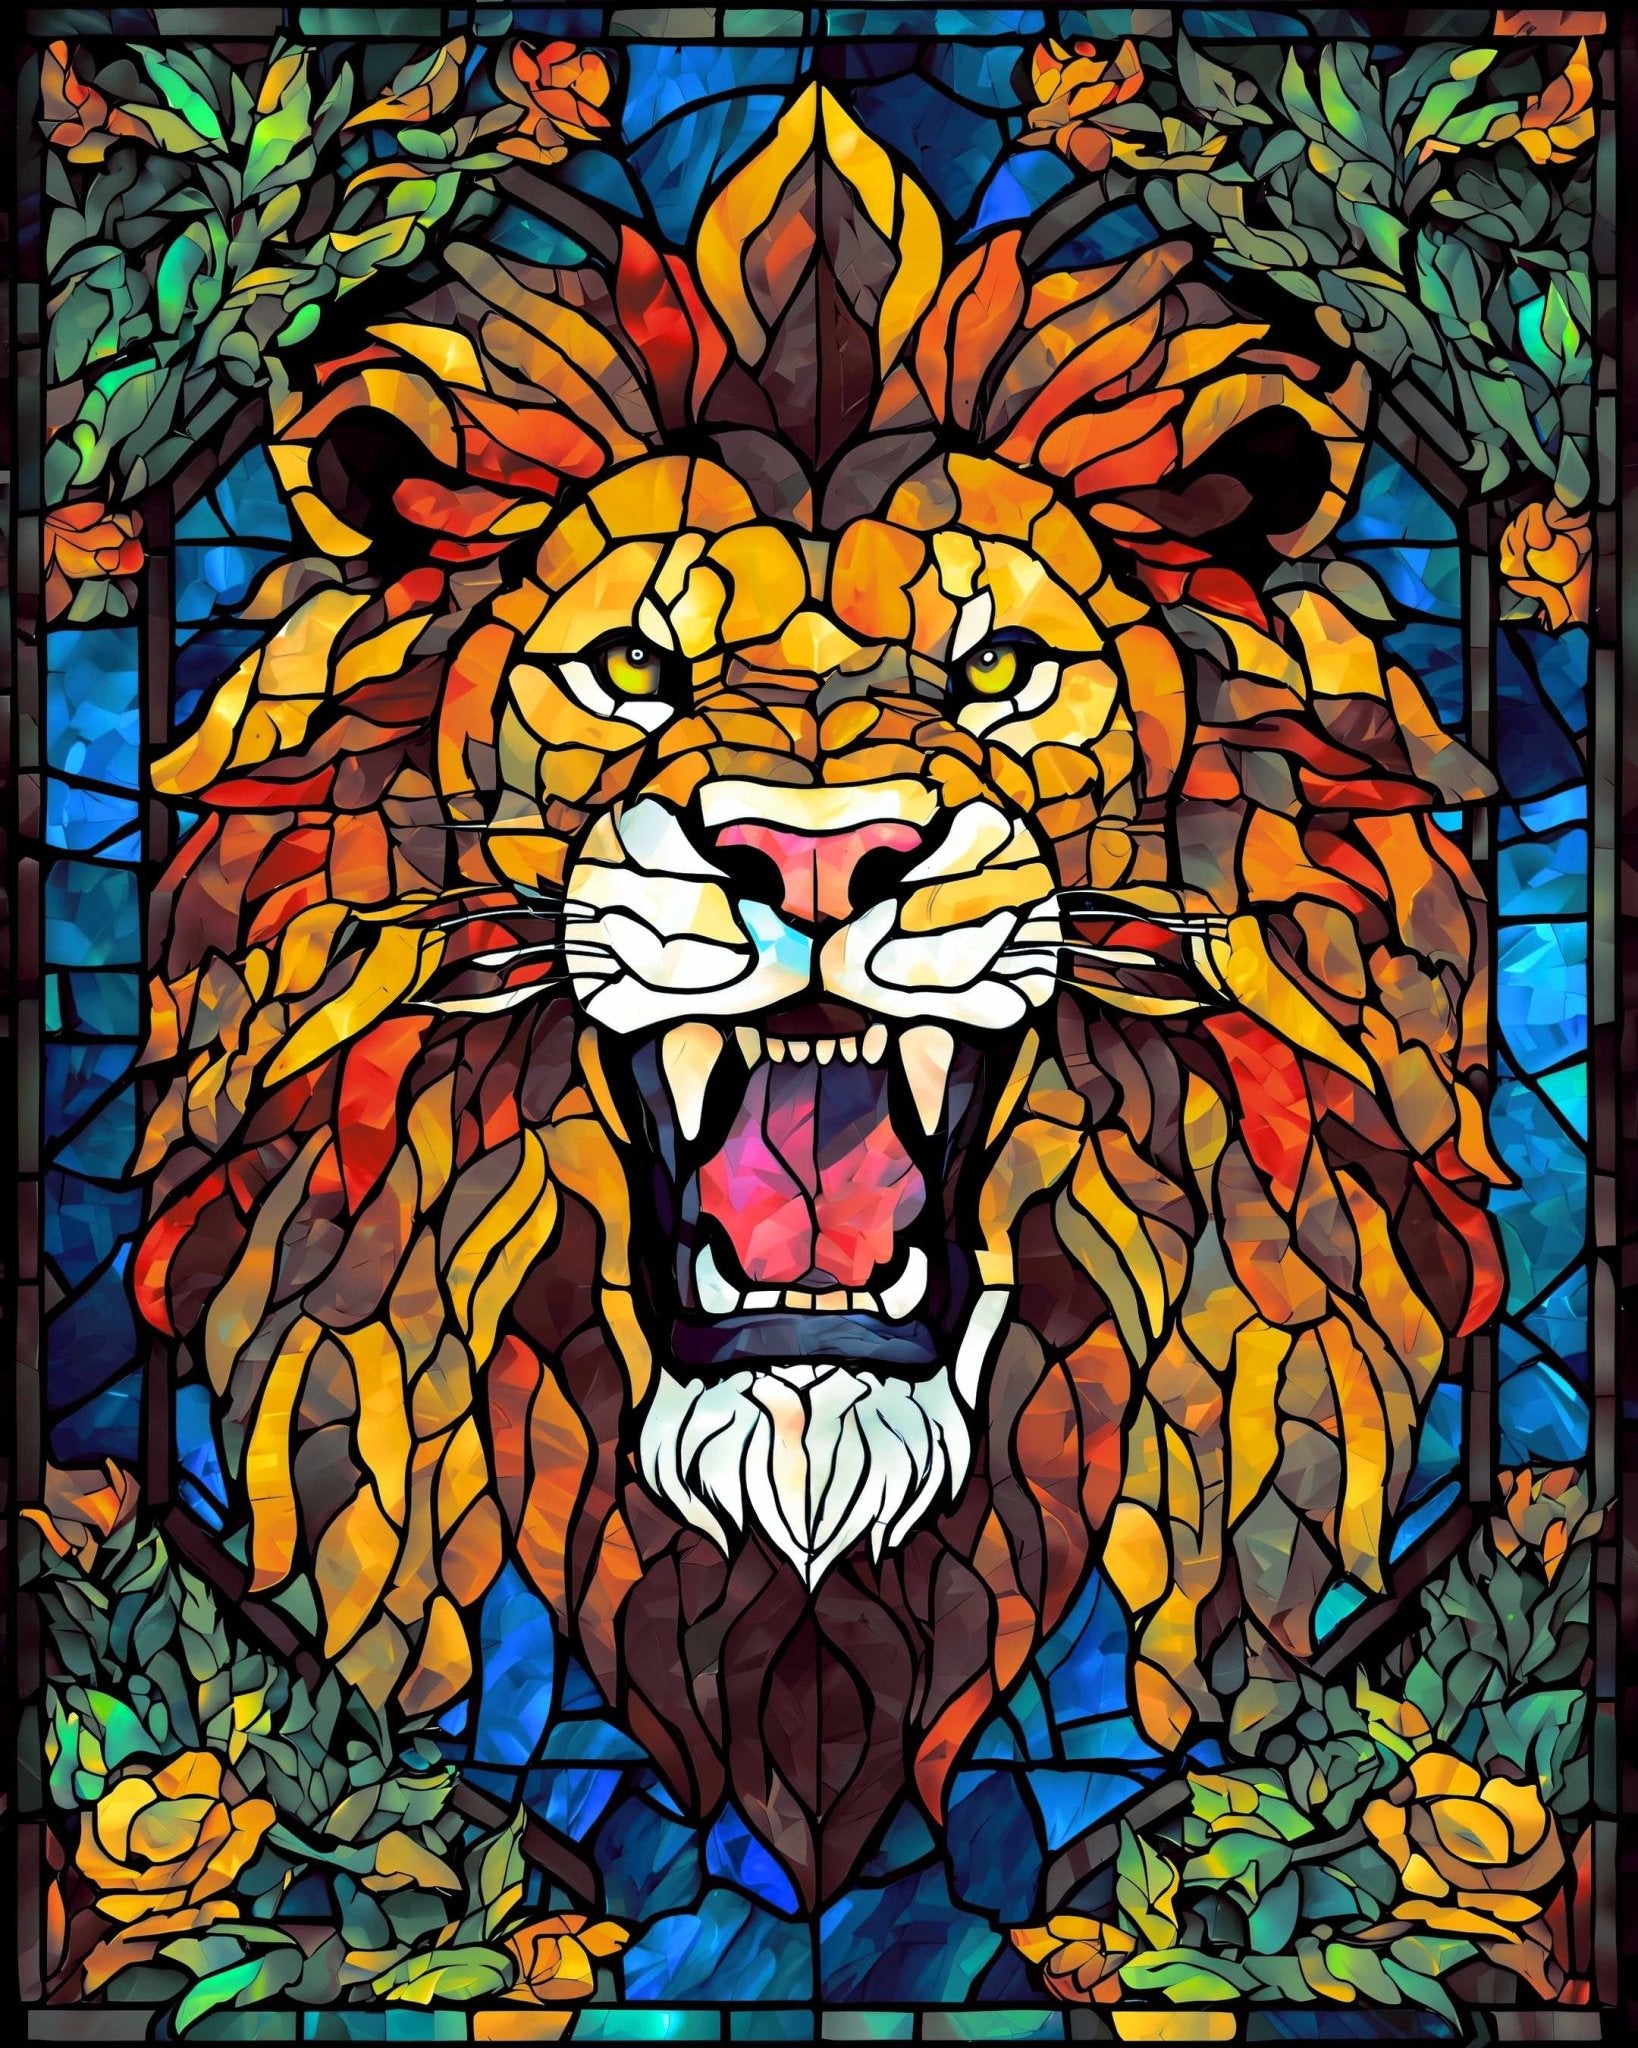 King of the jungle - Poster - Ever colorful